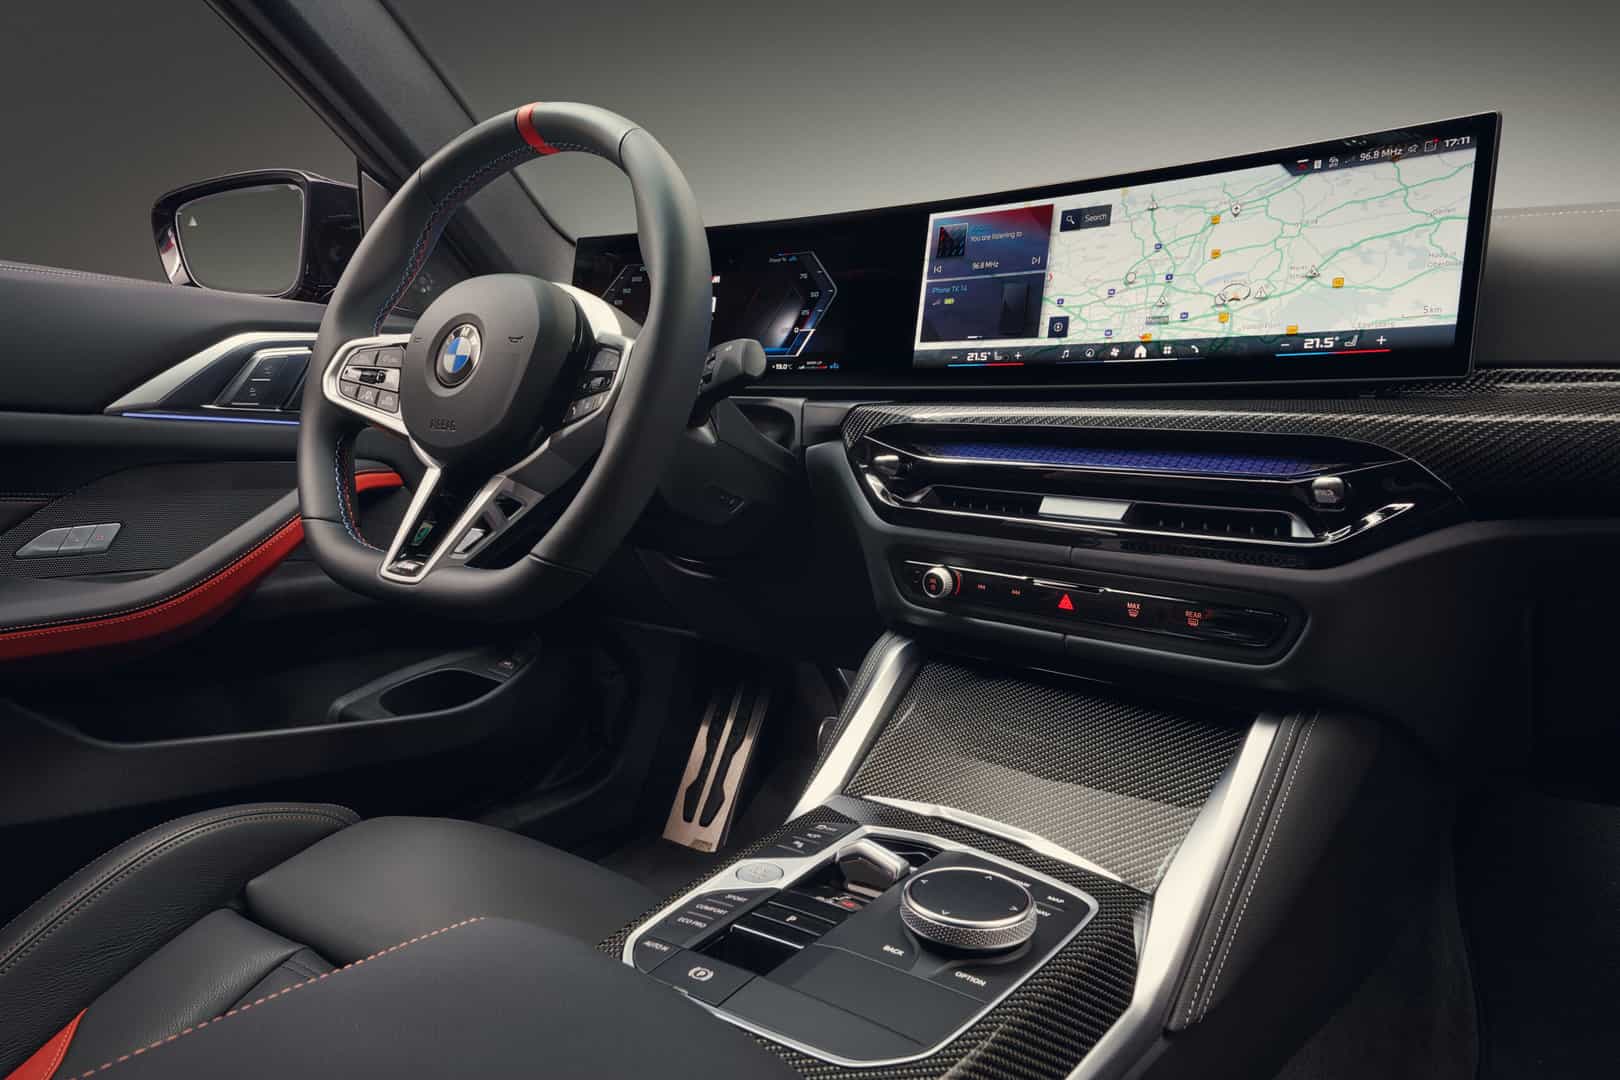 The new BMW Curved Display featuring in the new BMW 4 Series Coupe.